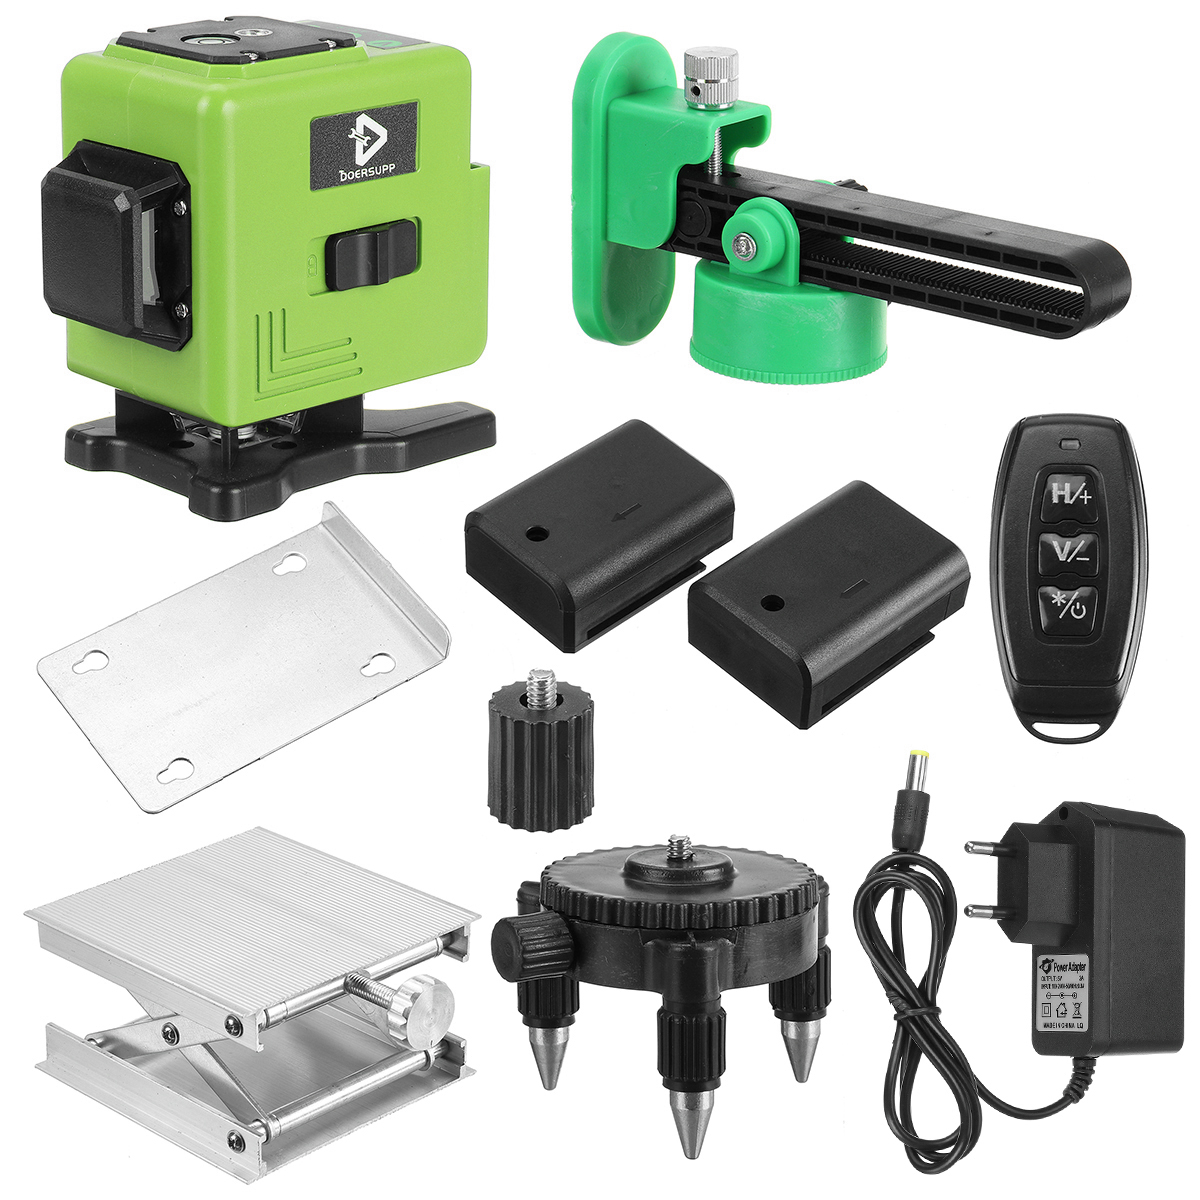 12-Line-Mini-Laser-Level-Green-Light-Wall-and-Floor-Dual-Purpose-Automatic-Wire-Bonding-Infrared-Lev-1903599-17